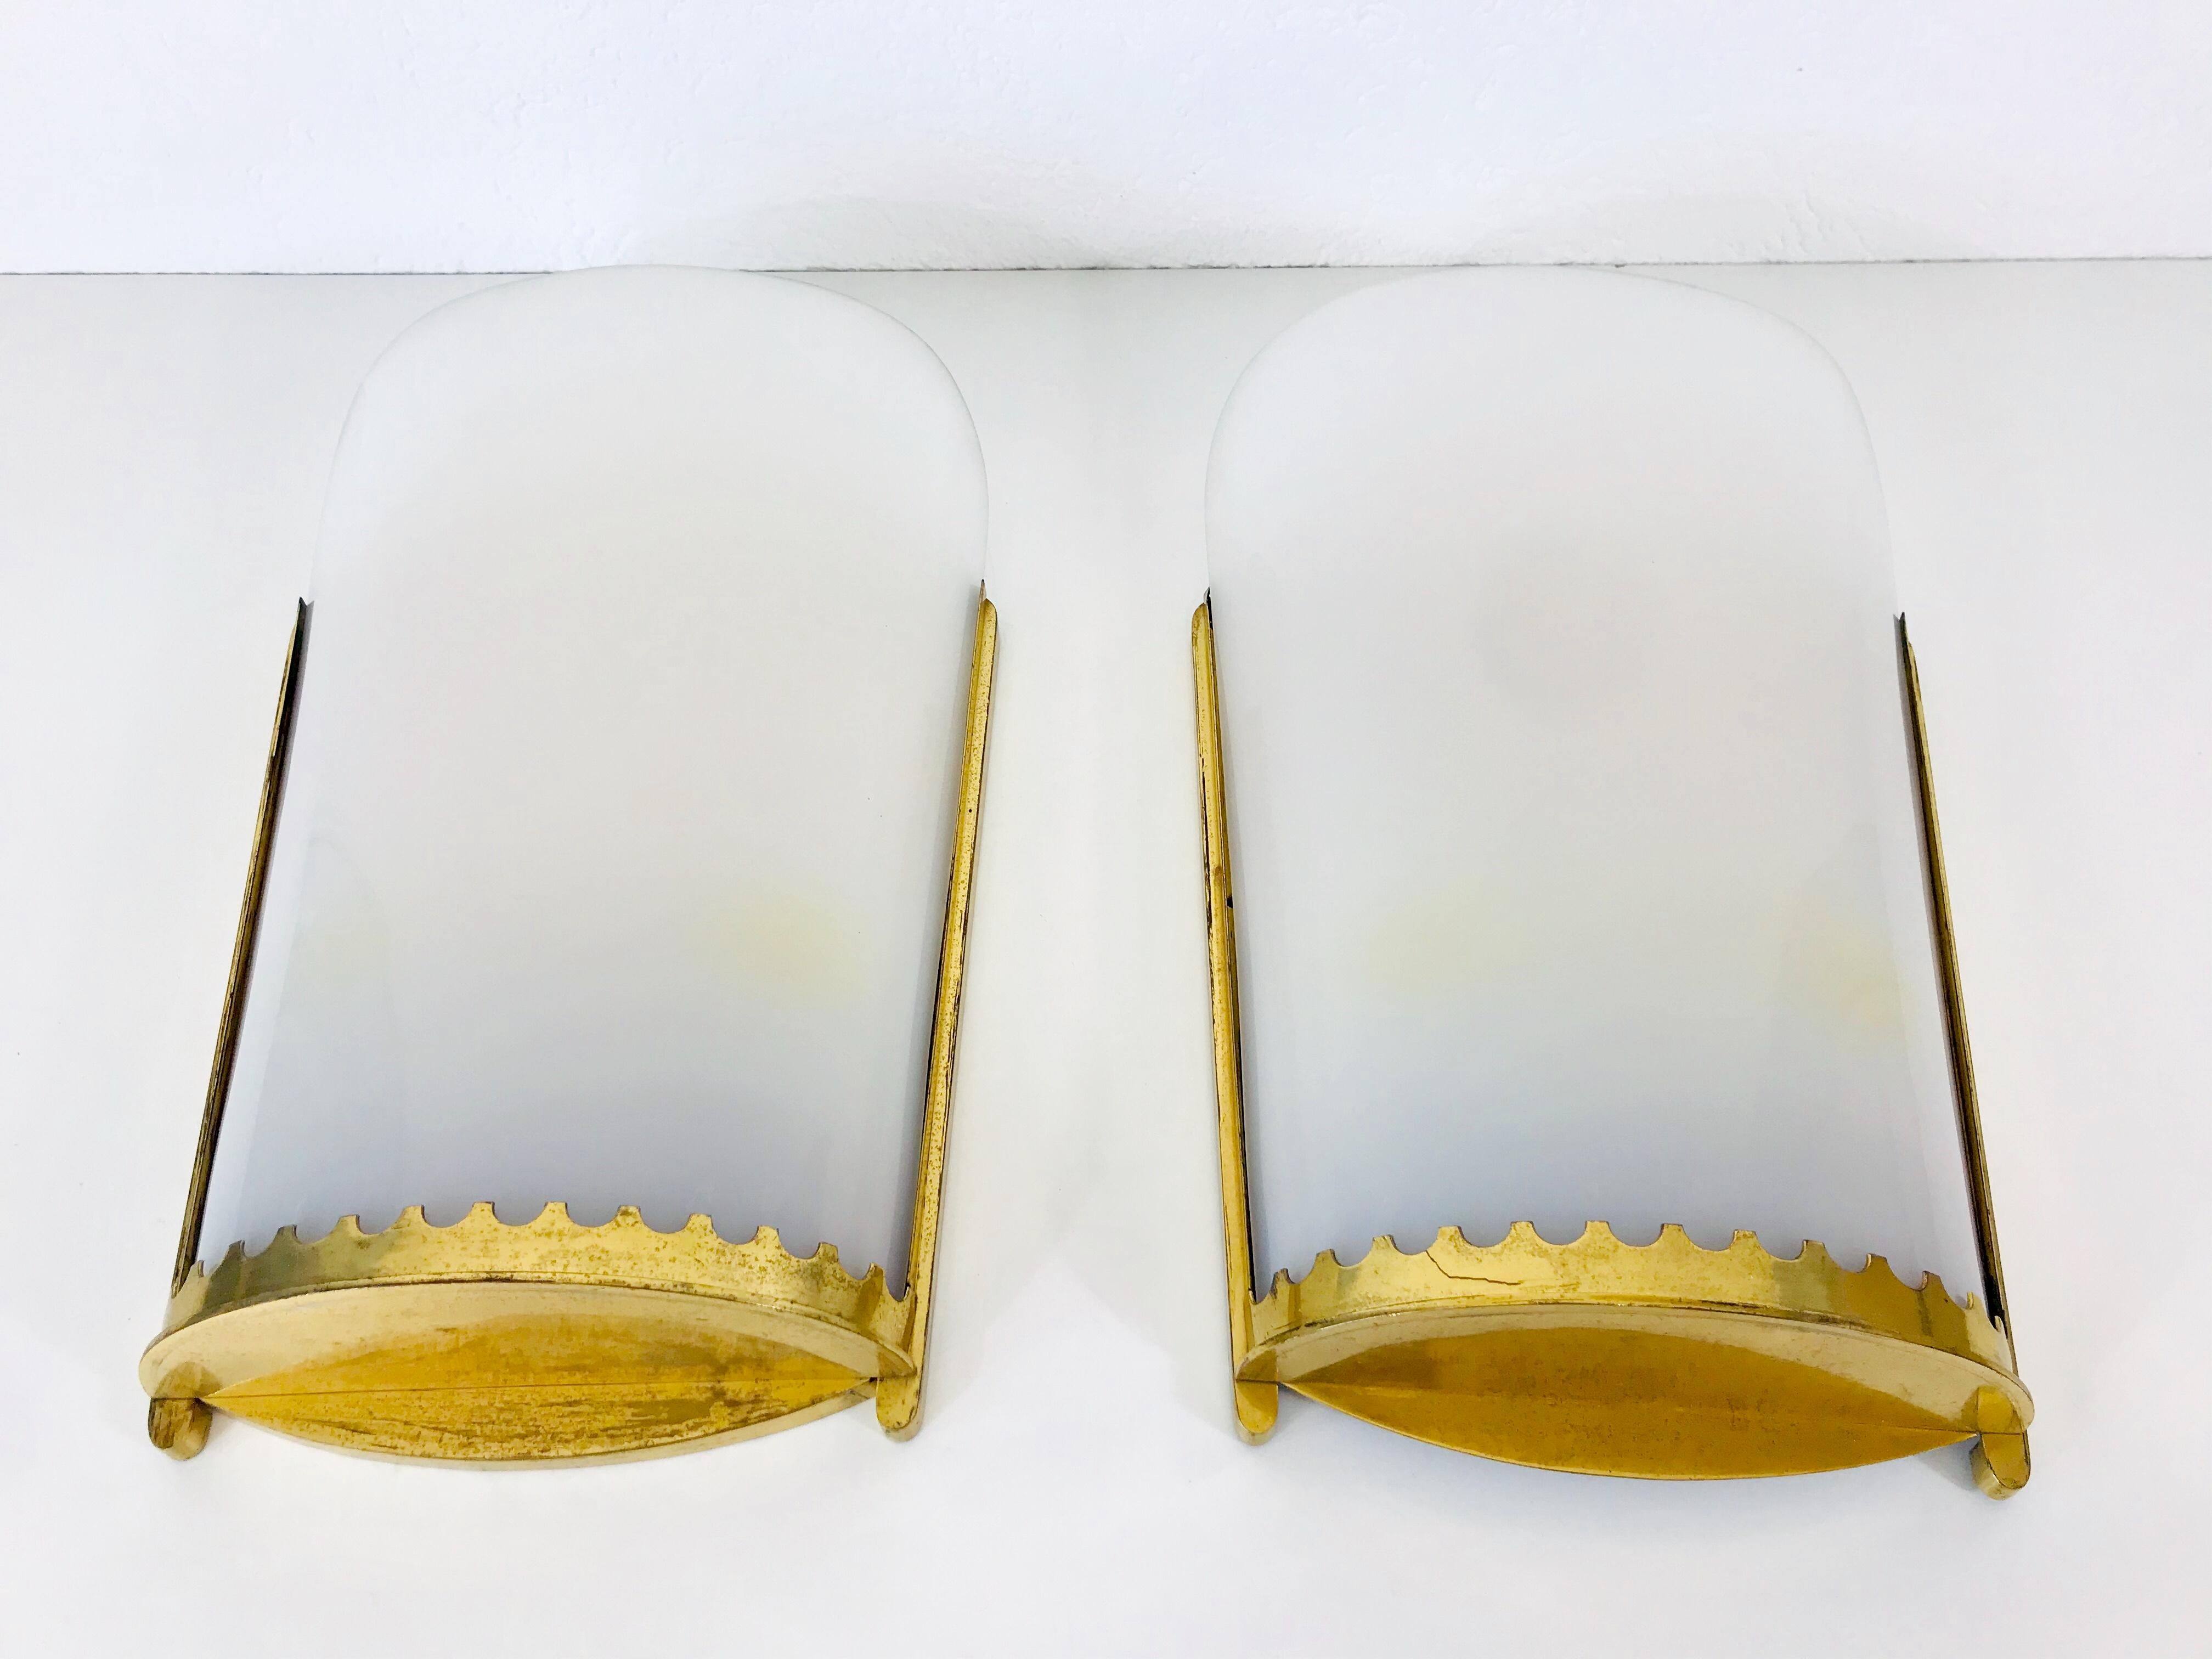 A pair of very large Mid-Century Modern wall lamps made in the 1950s.. They can perfectly be mounted on the wall. The shade of the lights is made of white perxpex with a brass frame.

The light requires three E27 light bulbs. Good vintage